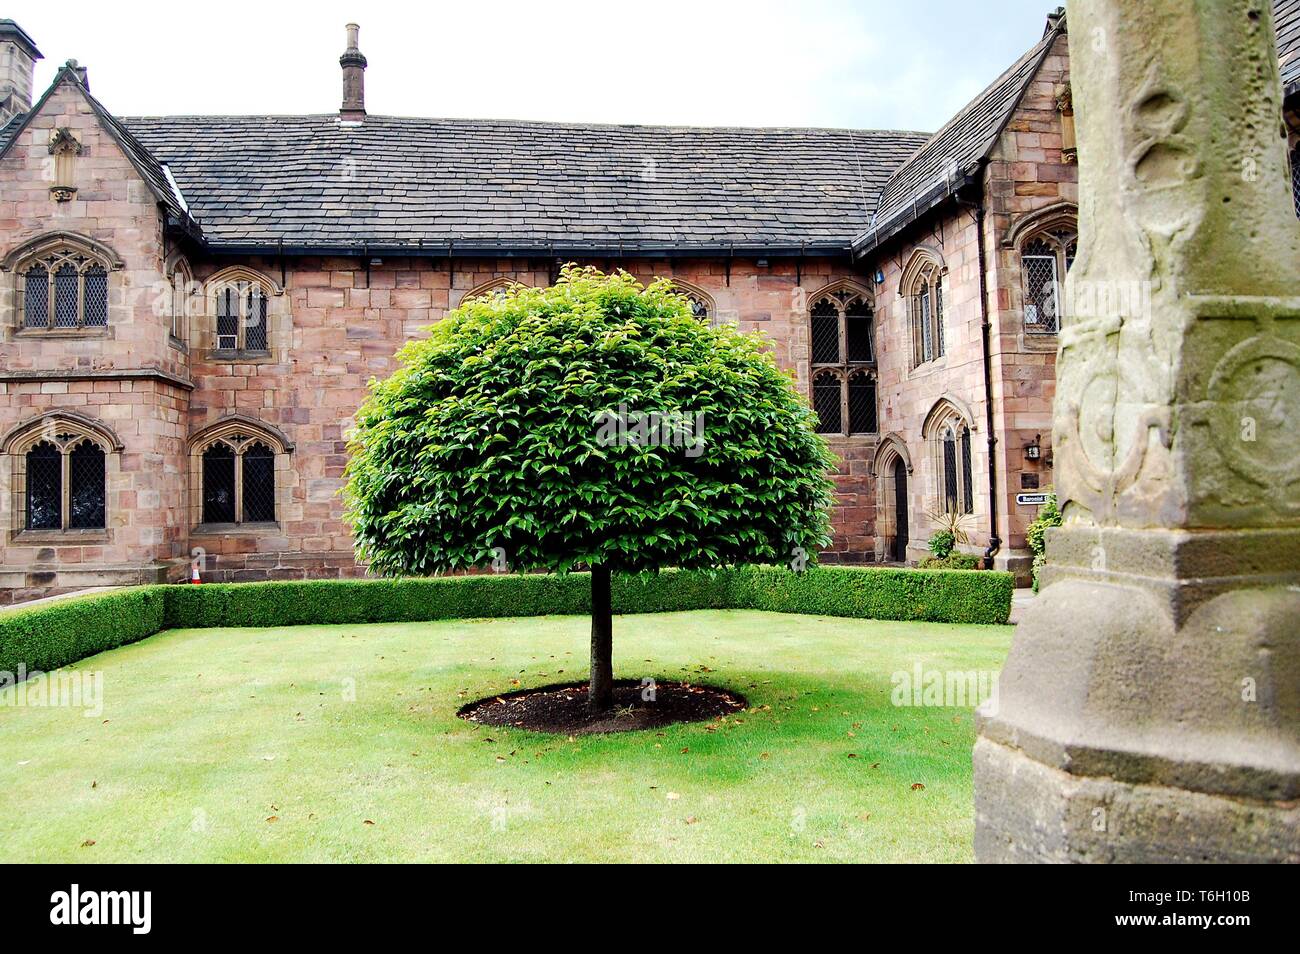 Looking towards the Baronial hall of Chetham's School, built in the 15th century; now part of the Chetham's School of Music in Manchester, uk Stock Photo